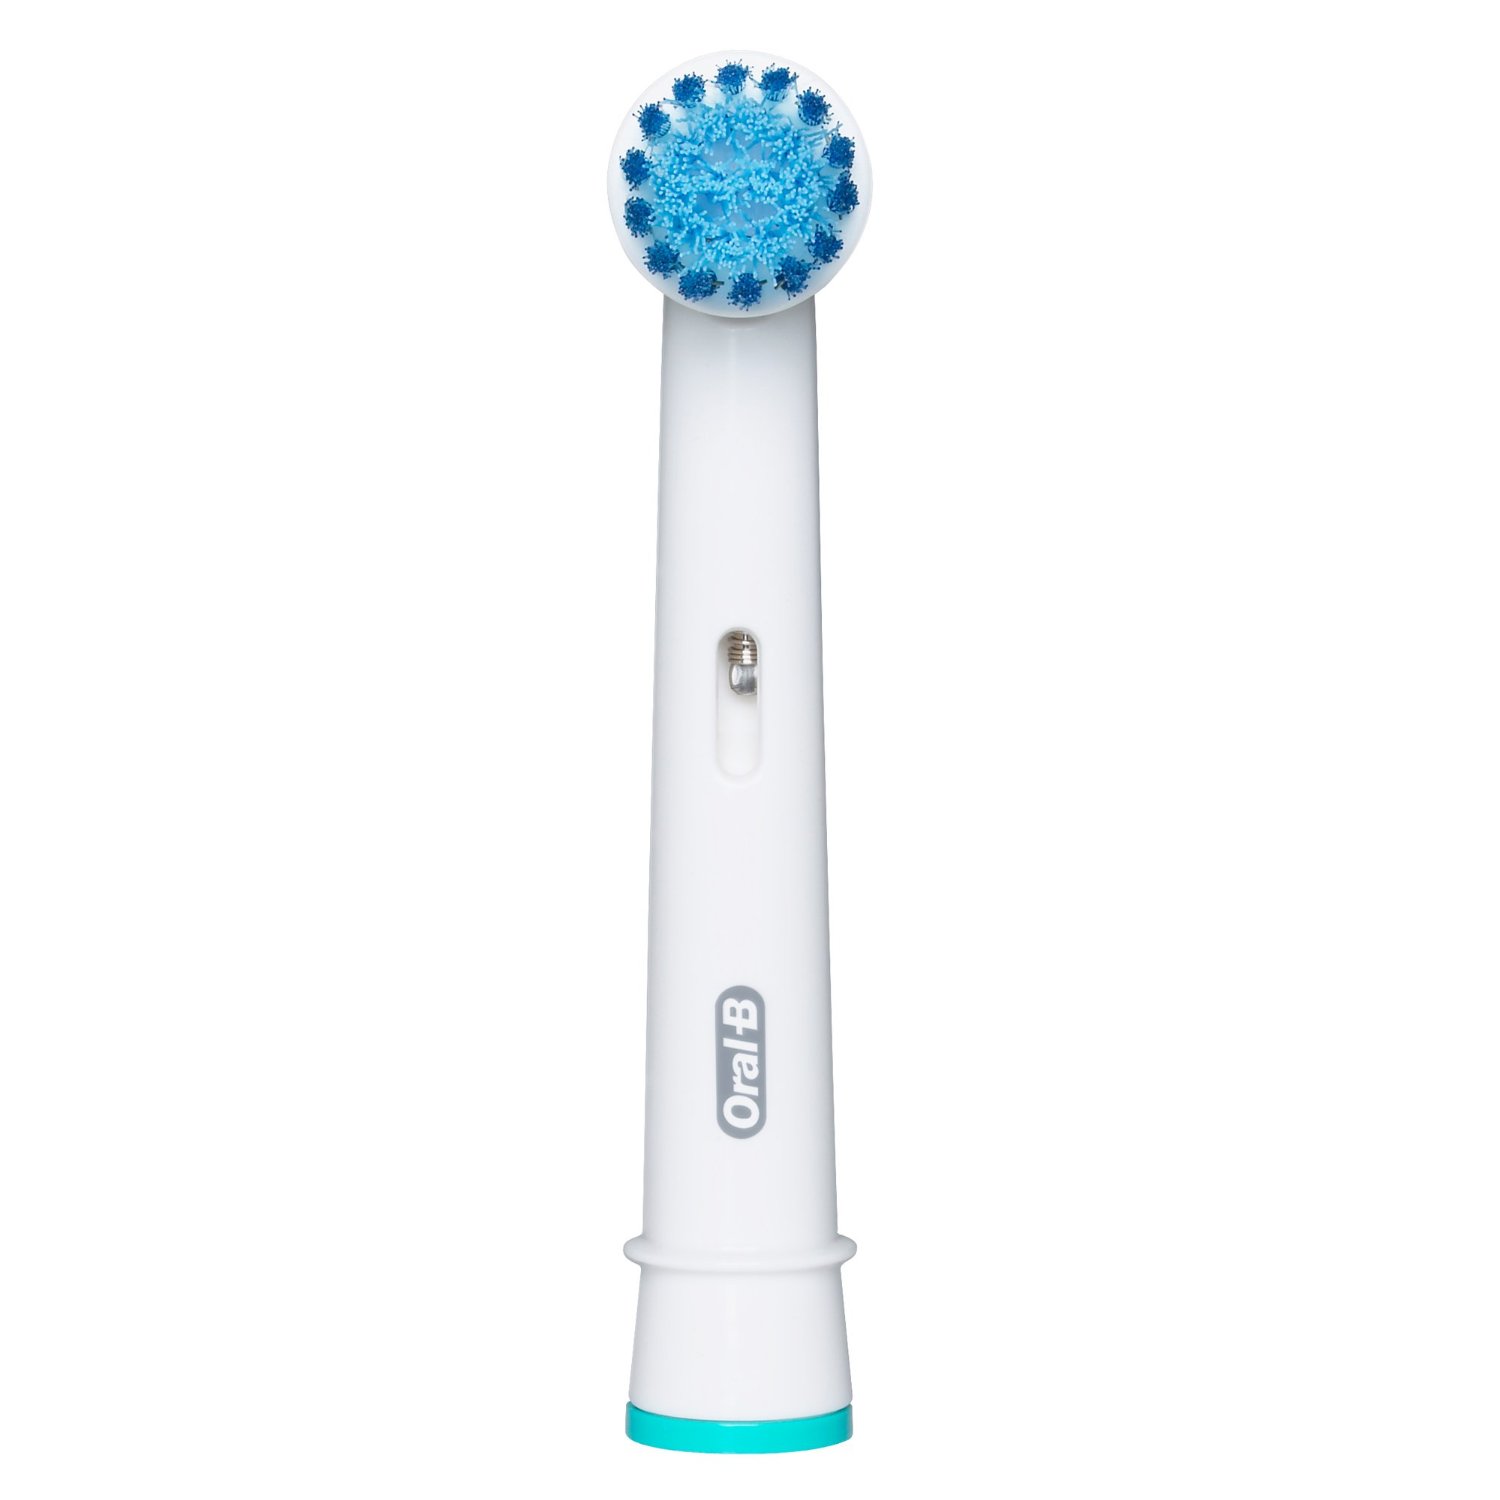 Oral-B Sensitive (3 Extra-Soft Brush heads) $11.99+free shipping